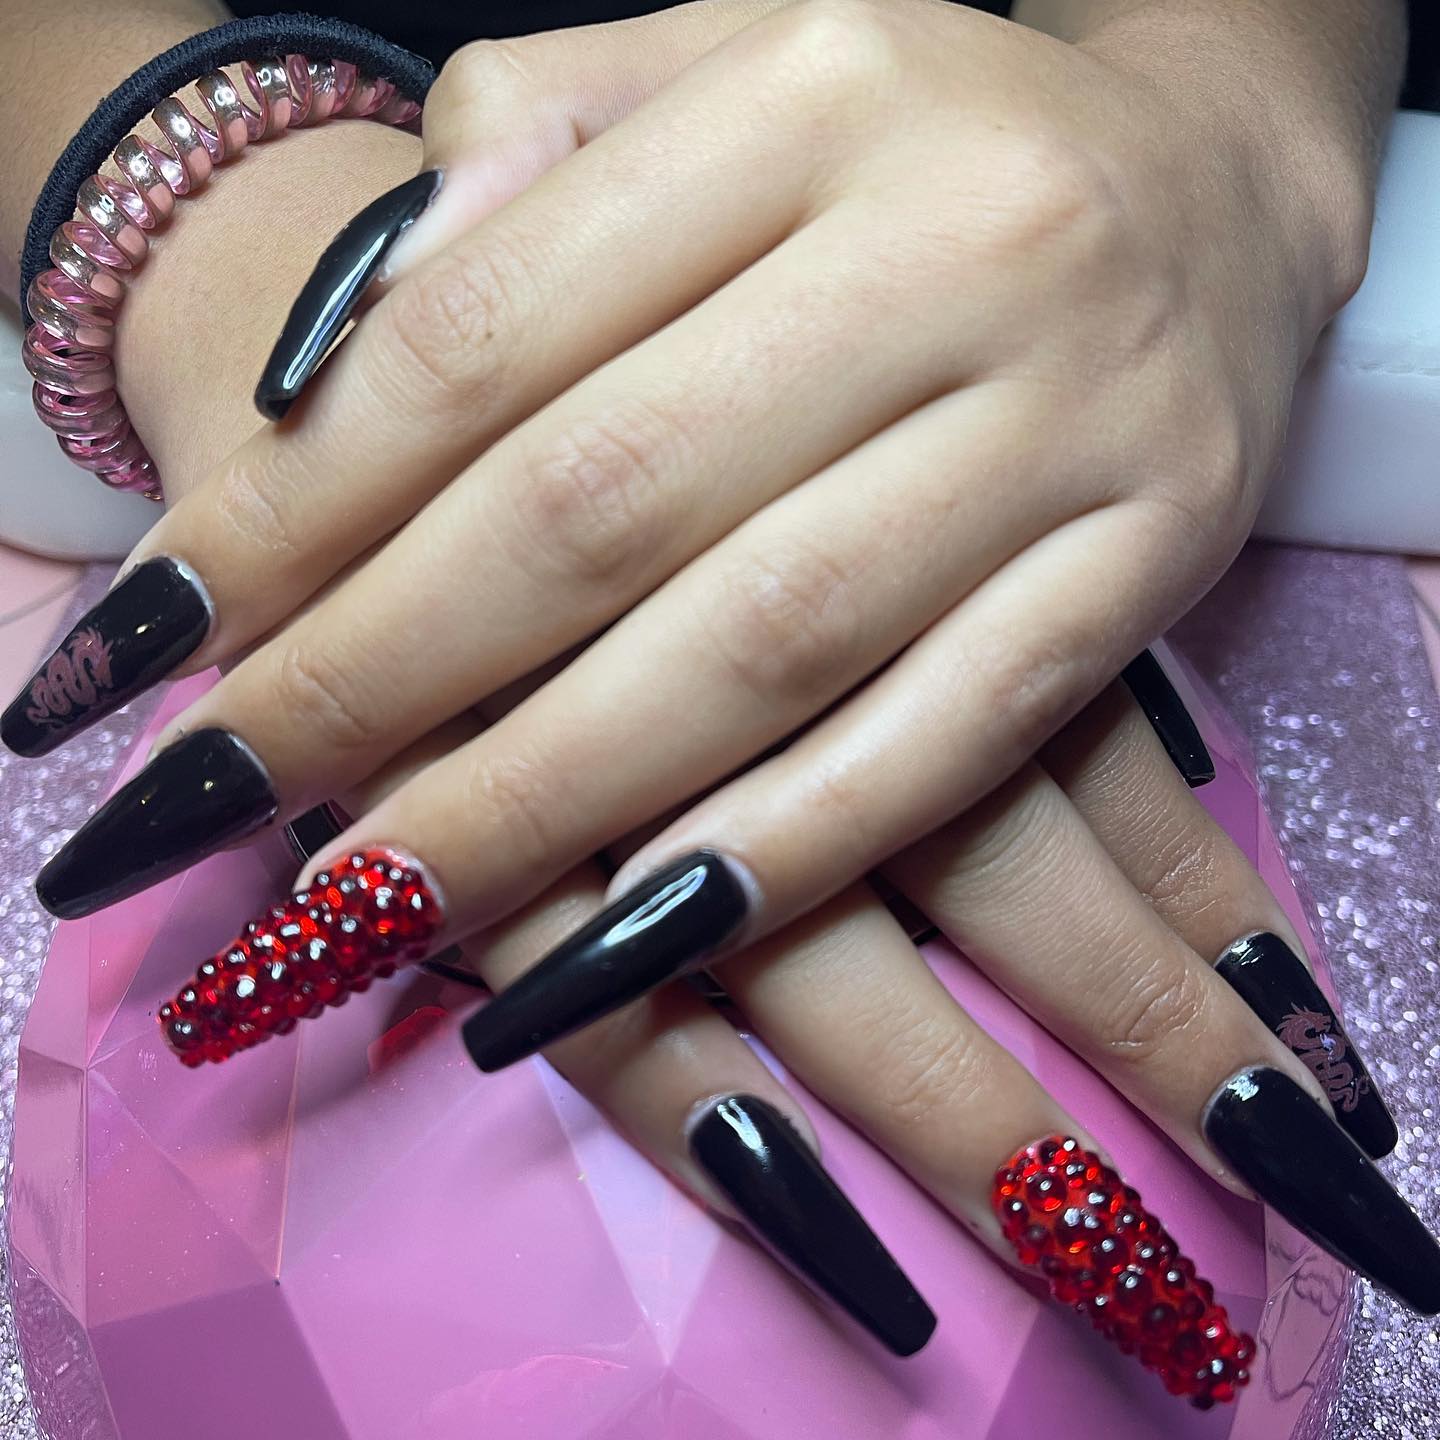 Black long coffin nails offer an amazing look for the ones who apply it. Are you ready to have fun with your long nails? Then, red accent nails with some shiny stones on them are all you need.